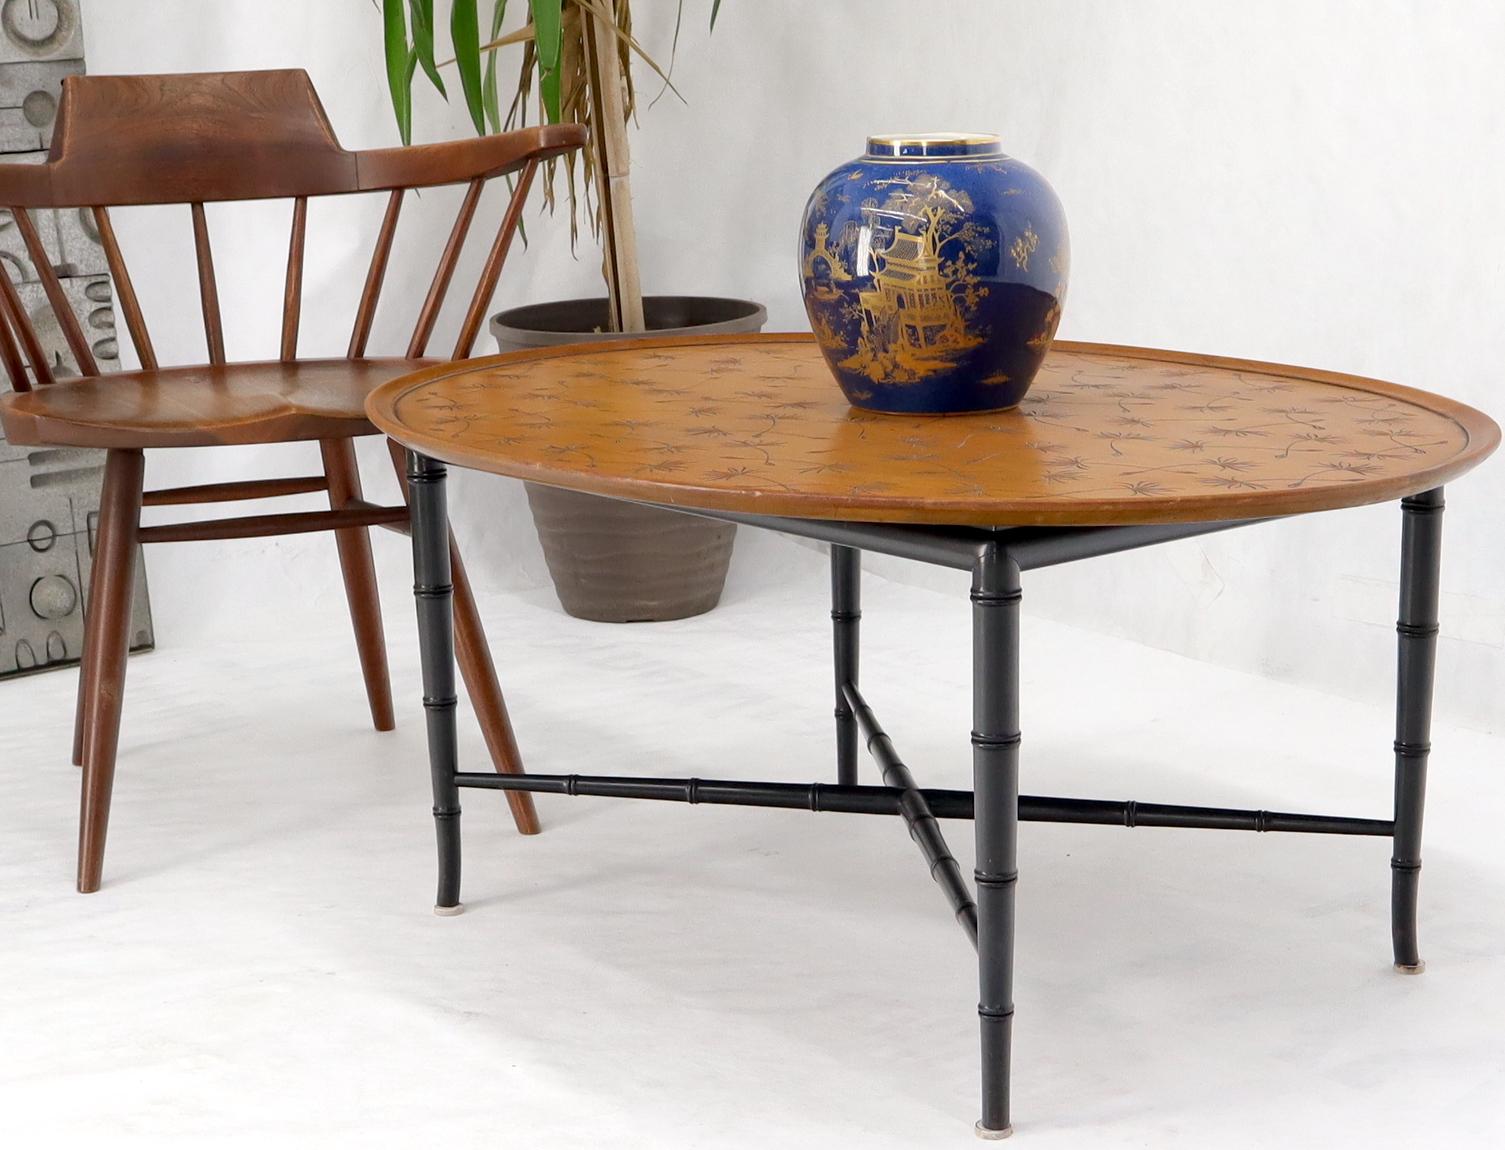 Carved Oval Kittinger Coffee Table Faux Bamboo Tapered Legs Incised Leafs Design on Top For Sale